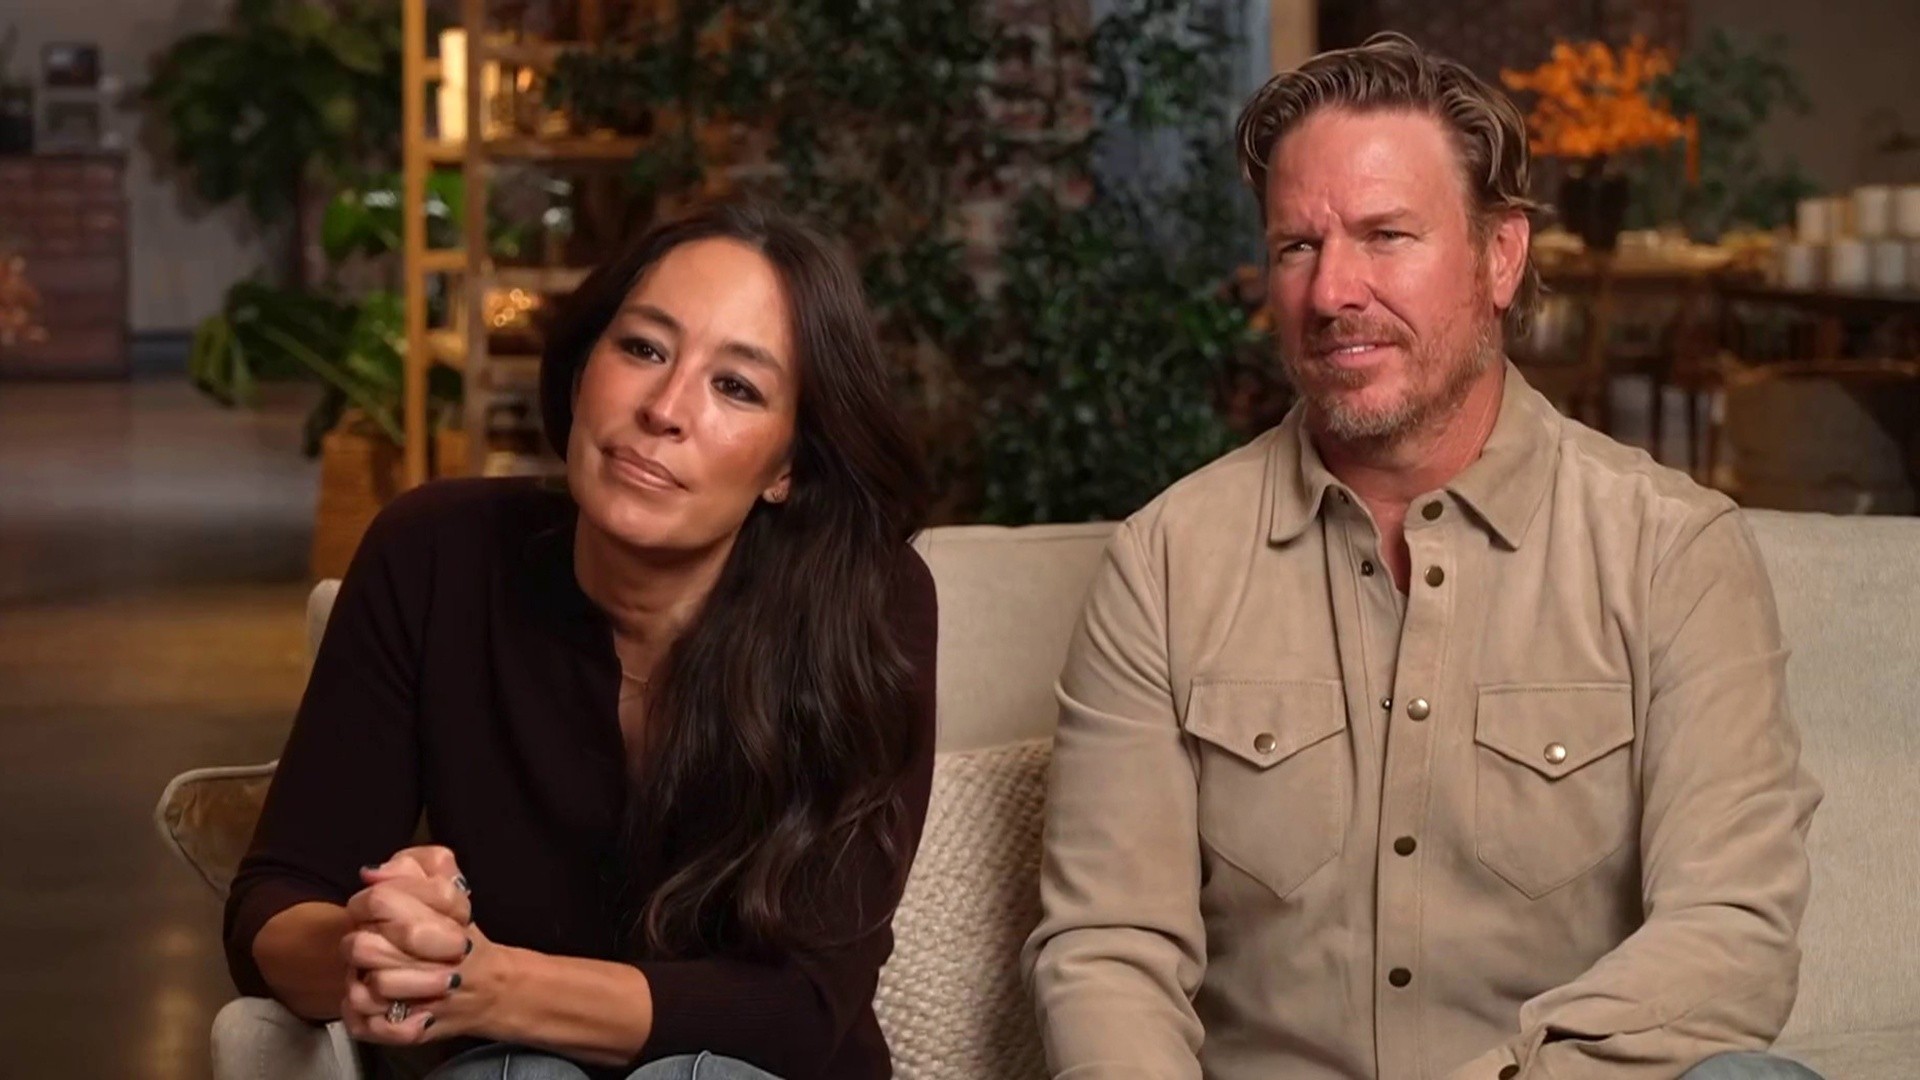 Where to Buy Joanna Gaines's Exclusive Stanley Cups